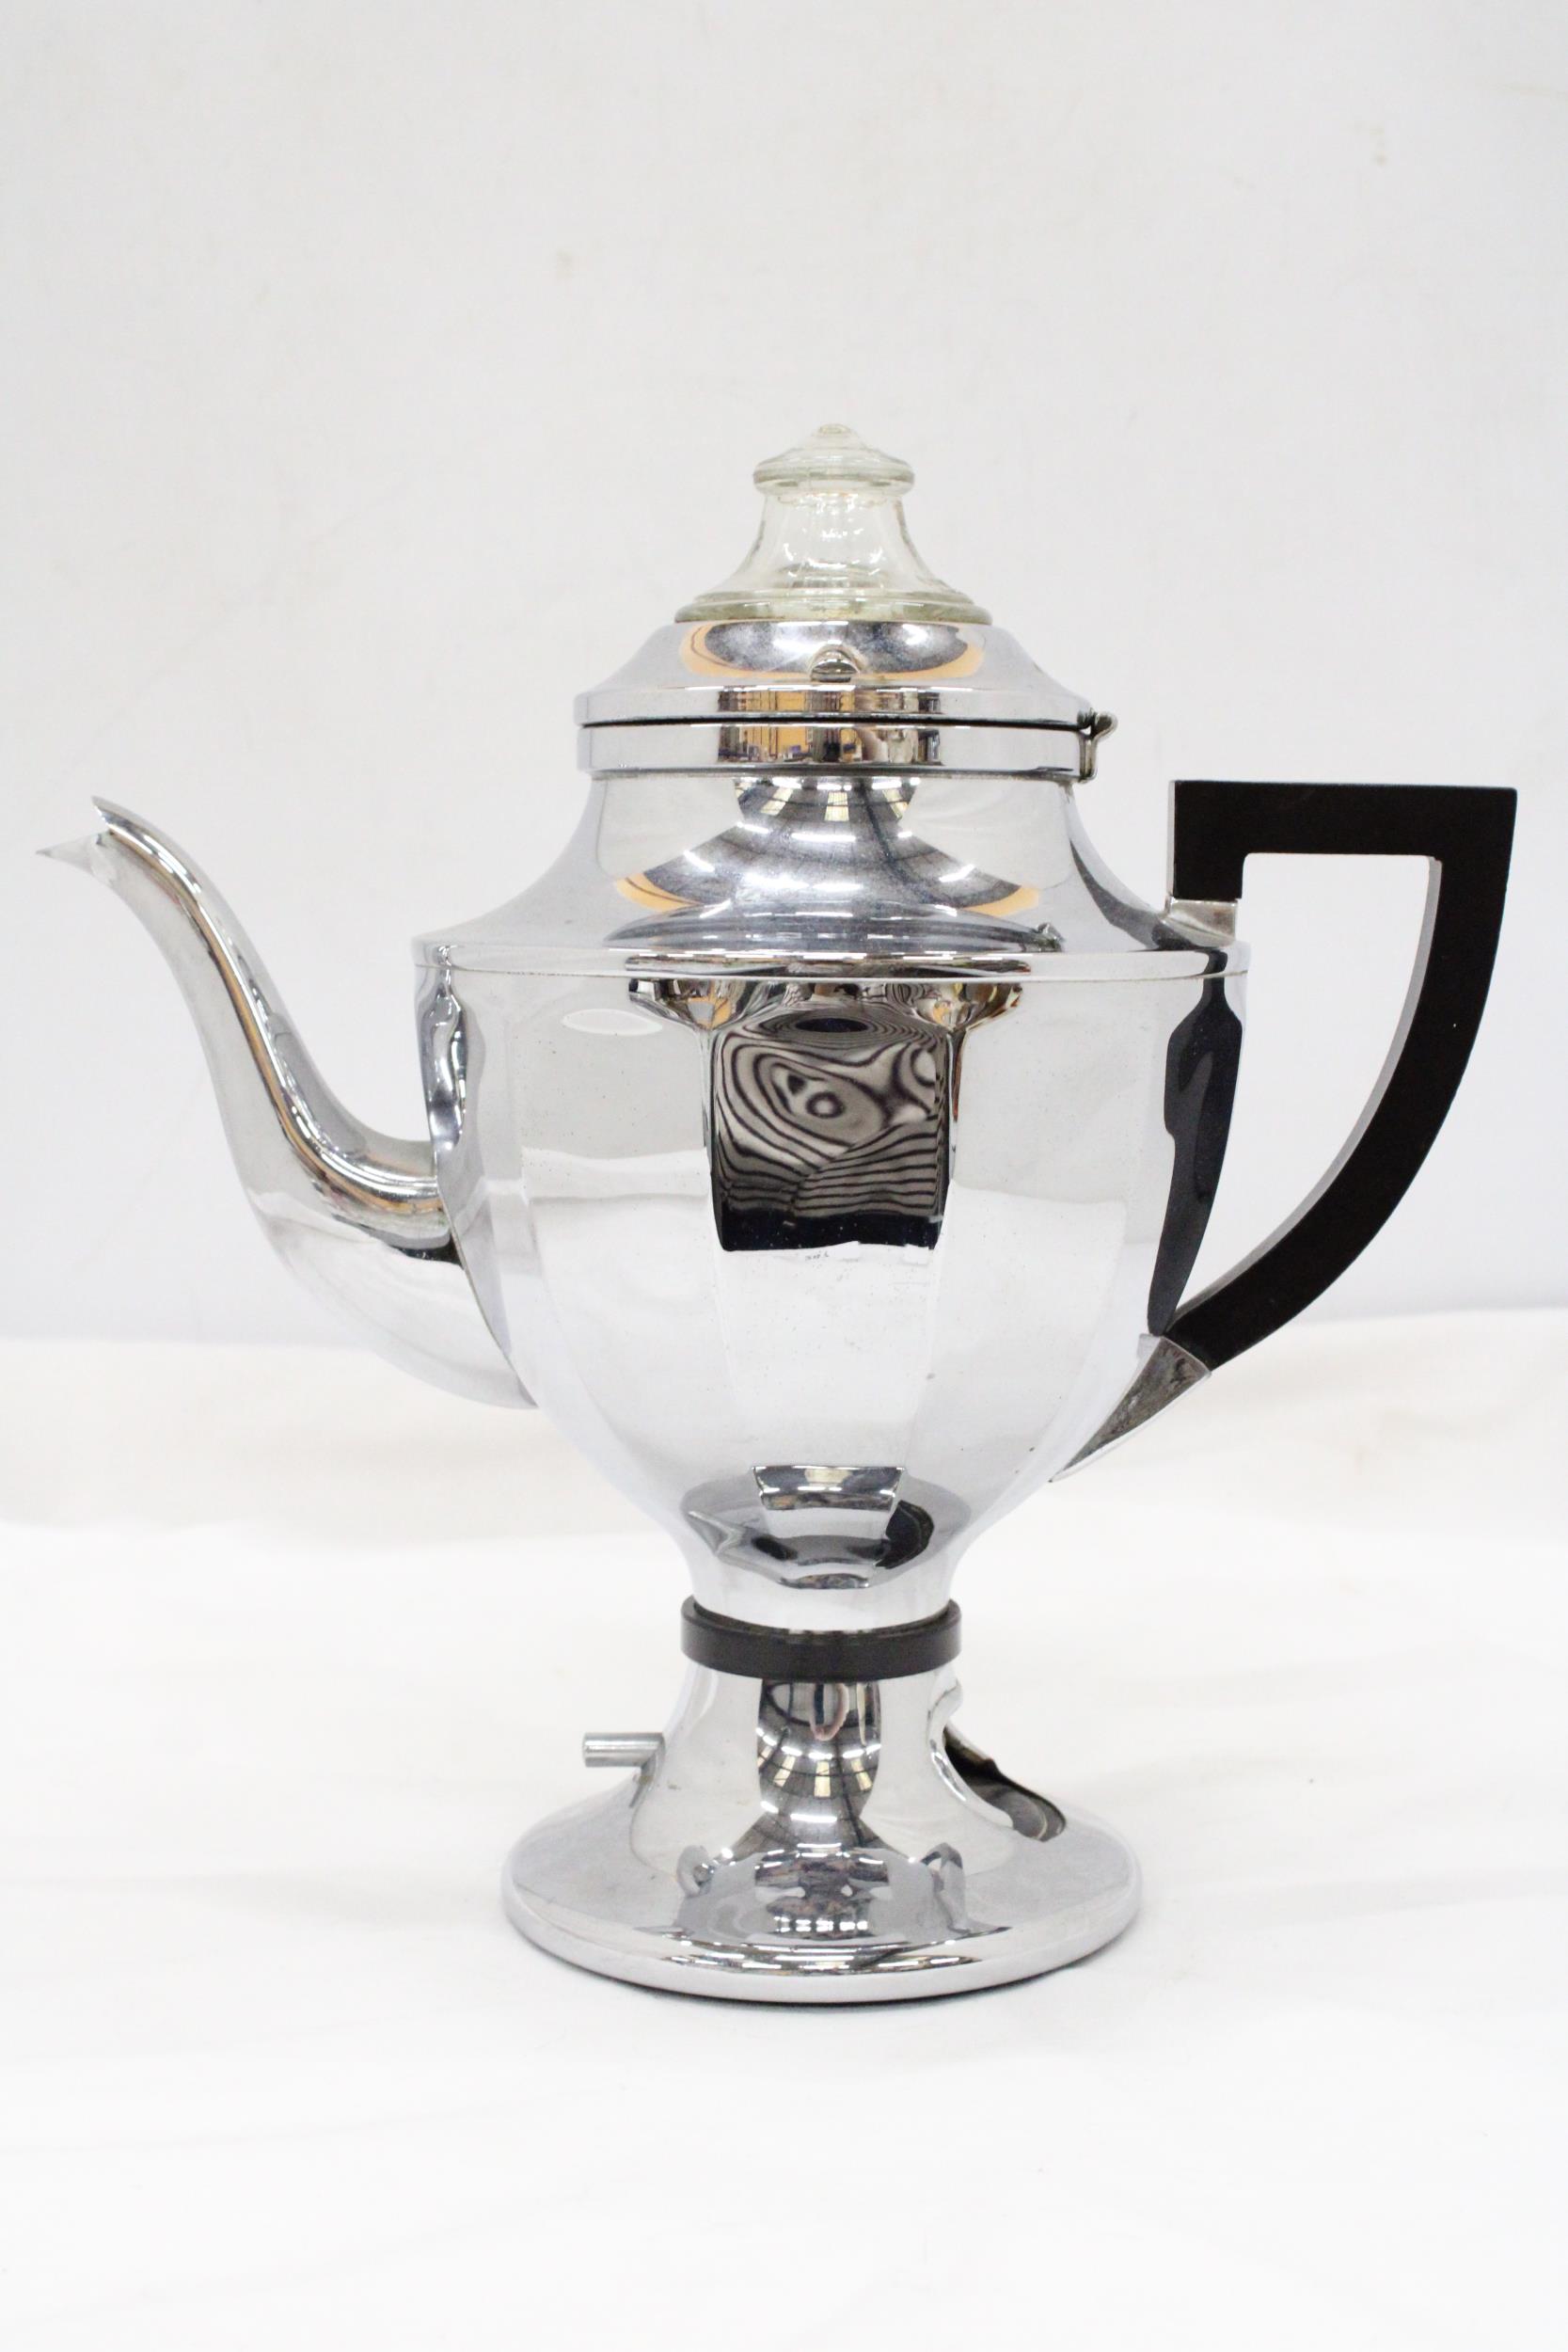 AN ART DECO STYLE, SILVER PLATED COFFEE PERCULATOR - Image 4 of 4